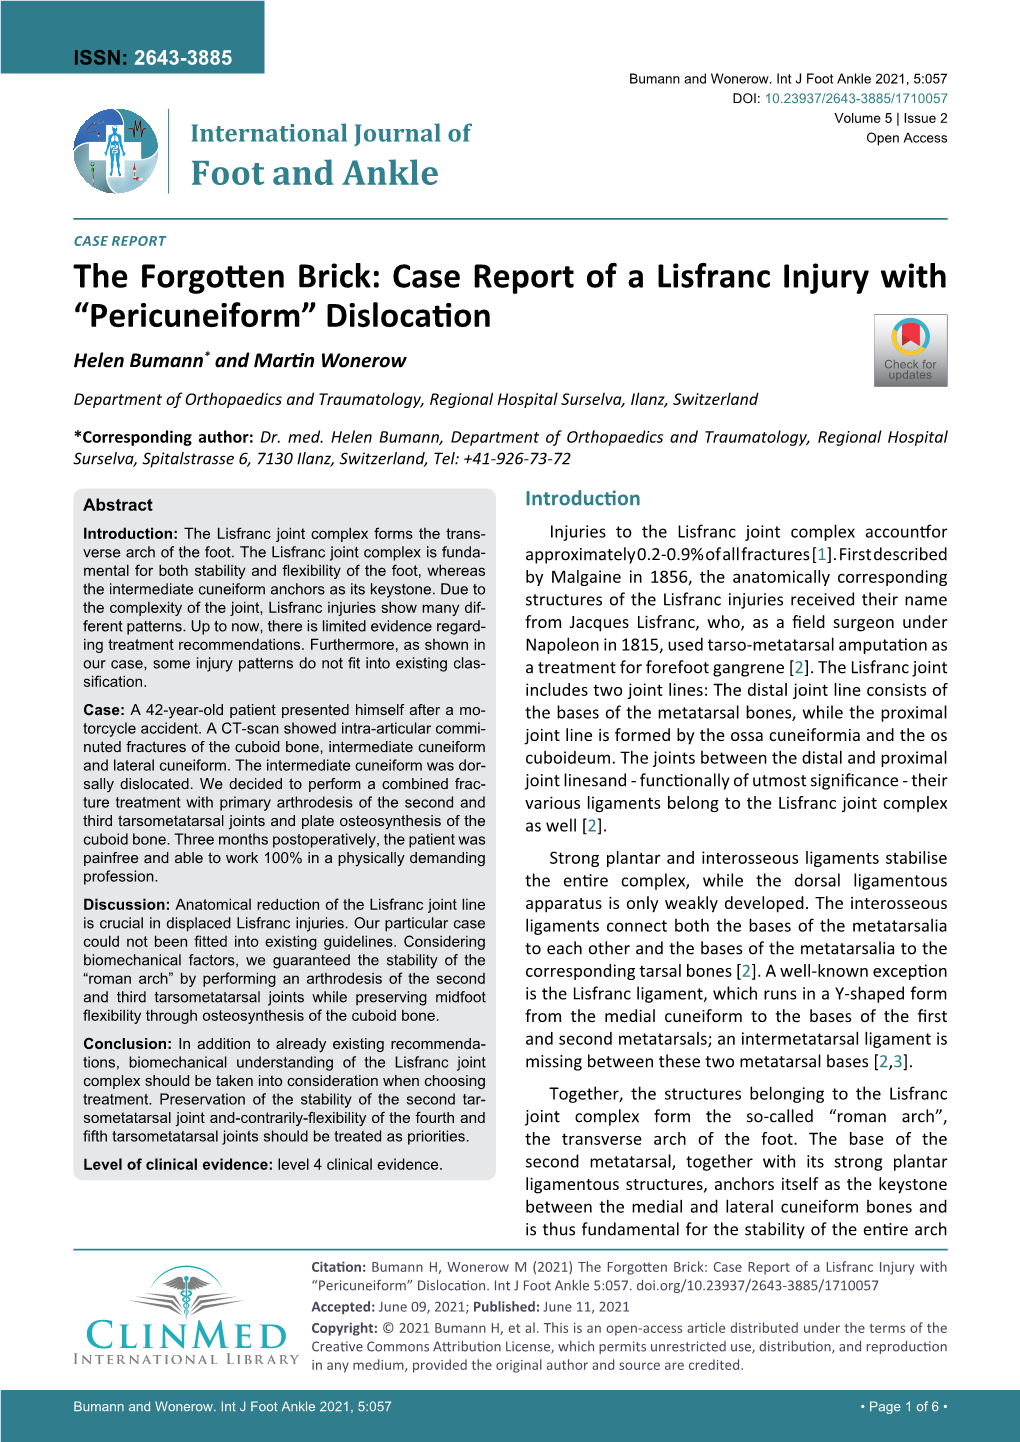 Case Report of a Lisfranc Injury with “Pericuneiform” Dislocation